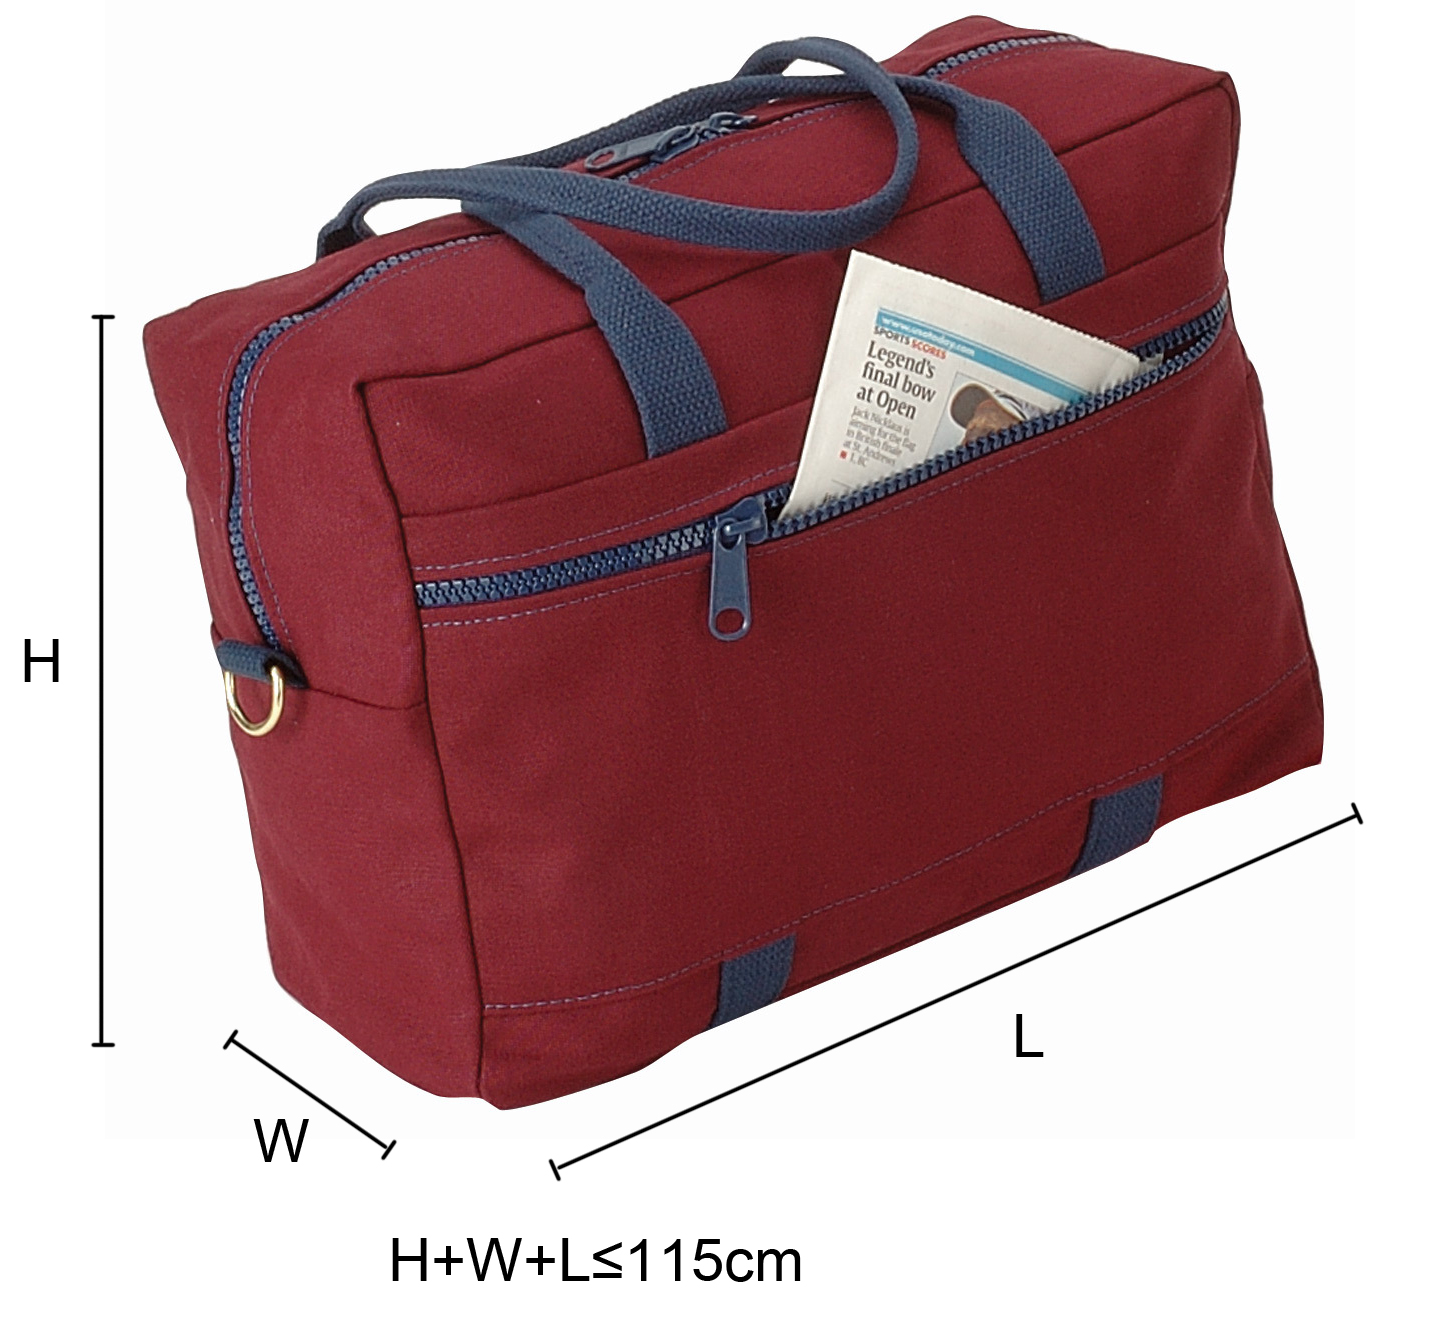 Maximum Size of Carry-on Baggage